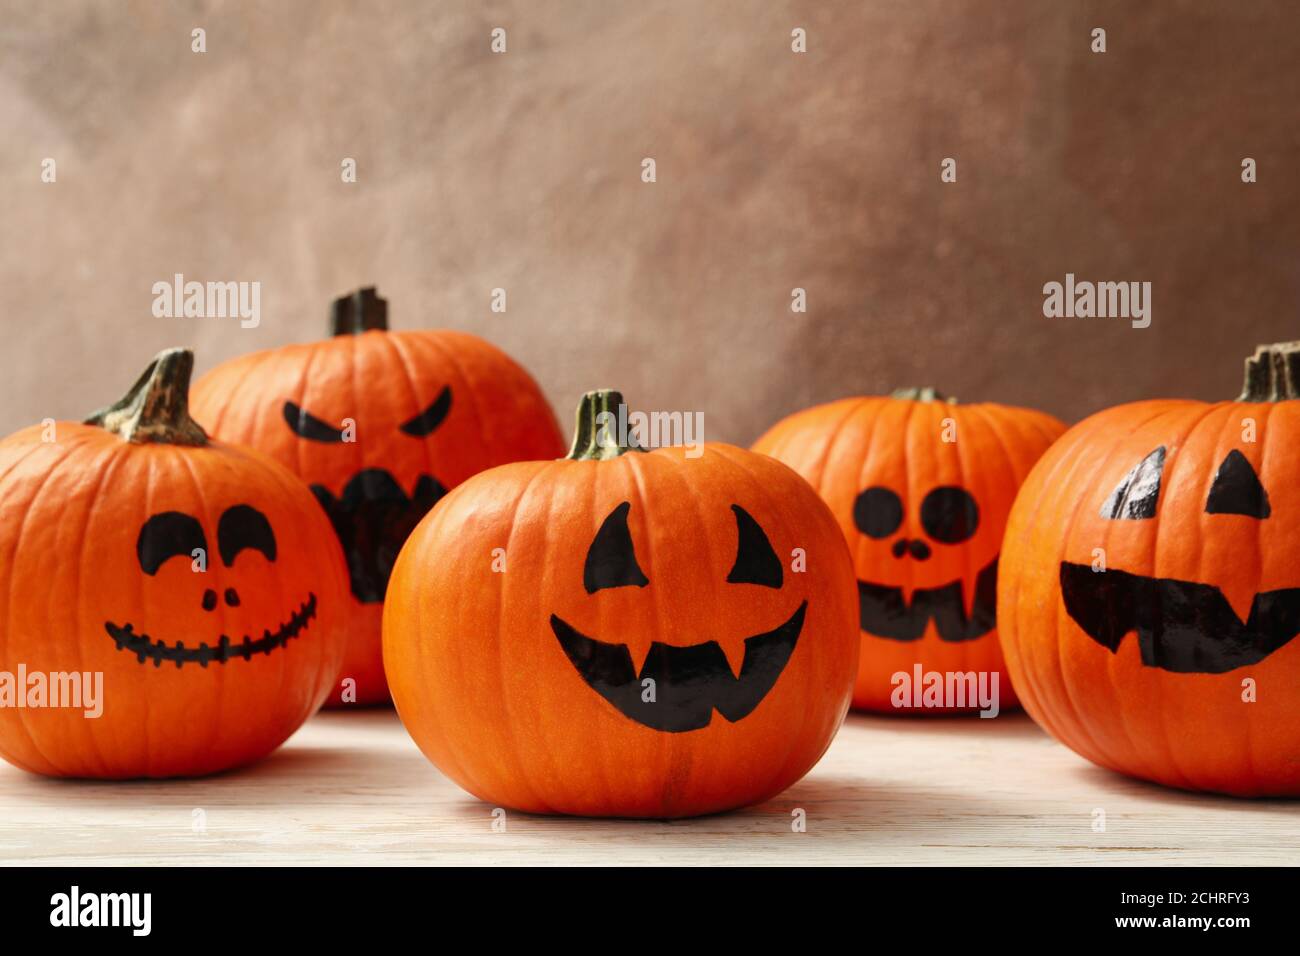 Funny halloween pumpkins against brown background, space for text Stock Photo